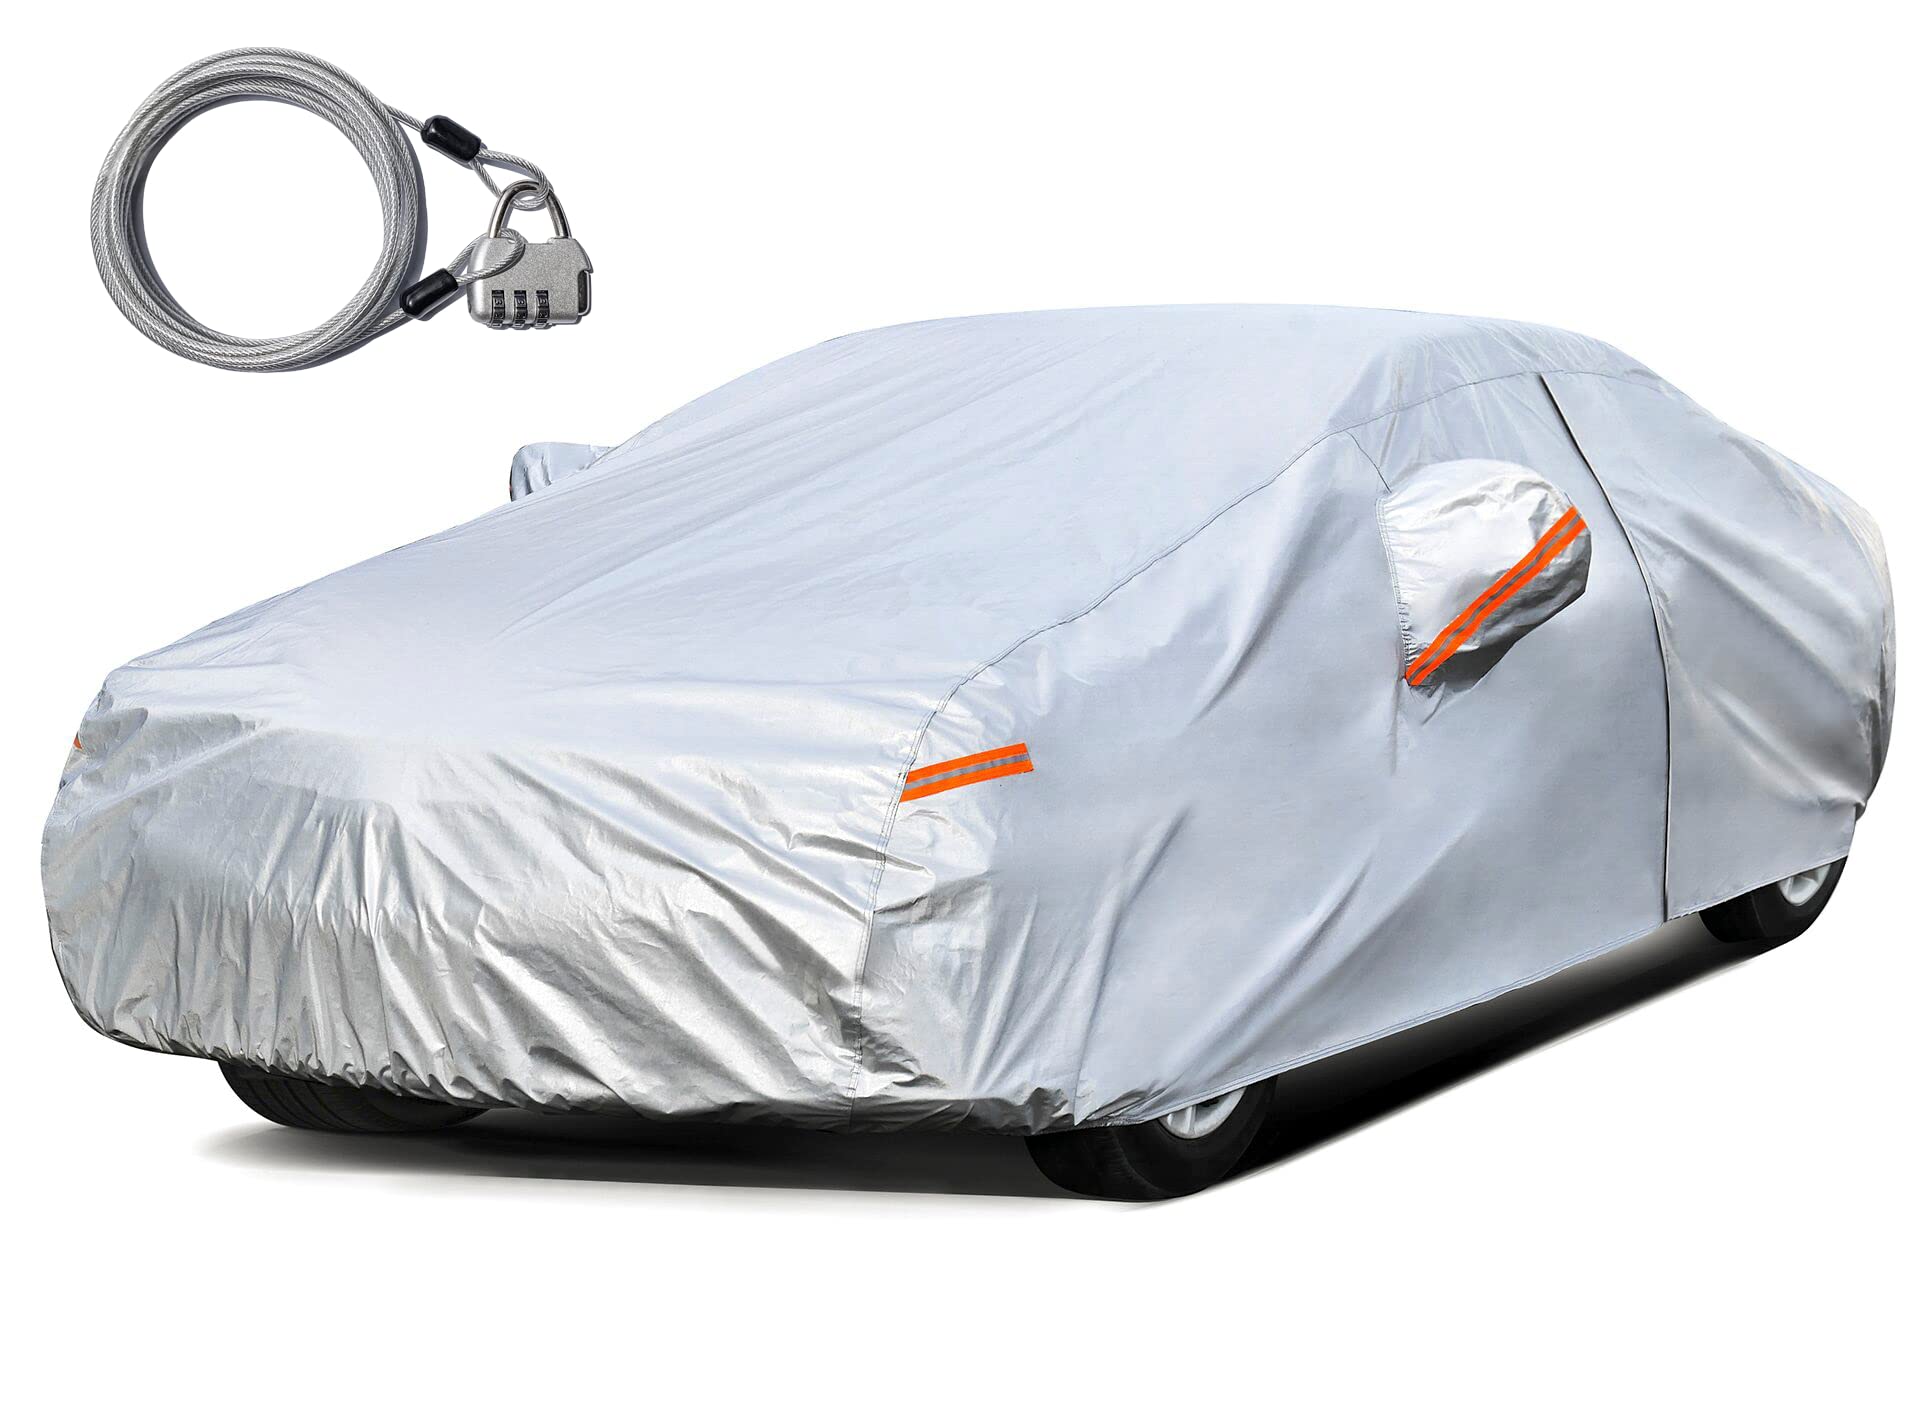 kayme car cover for Automobiles All Weather Waterproof with Lock and Zipper Door, Outdoor cover Sun Uv Rain Protection, Fit Seda